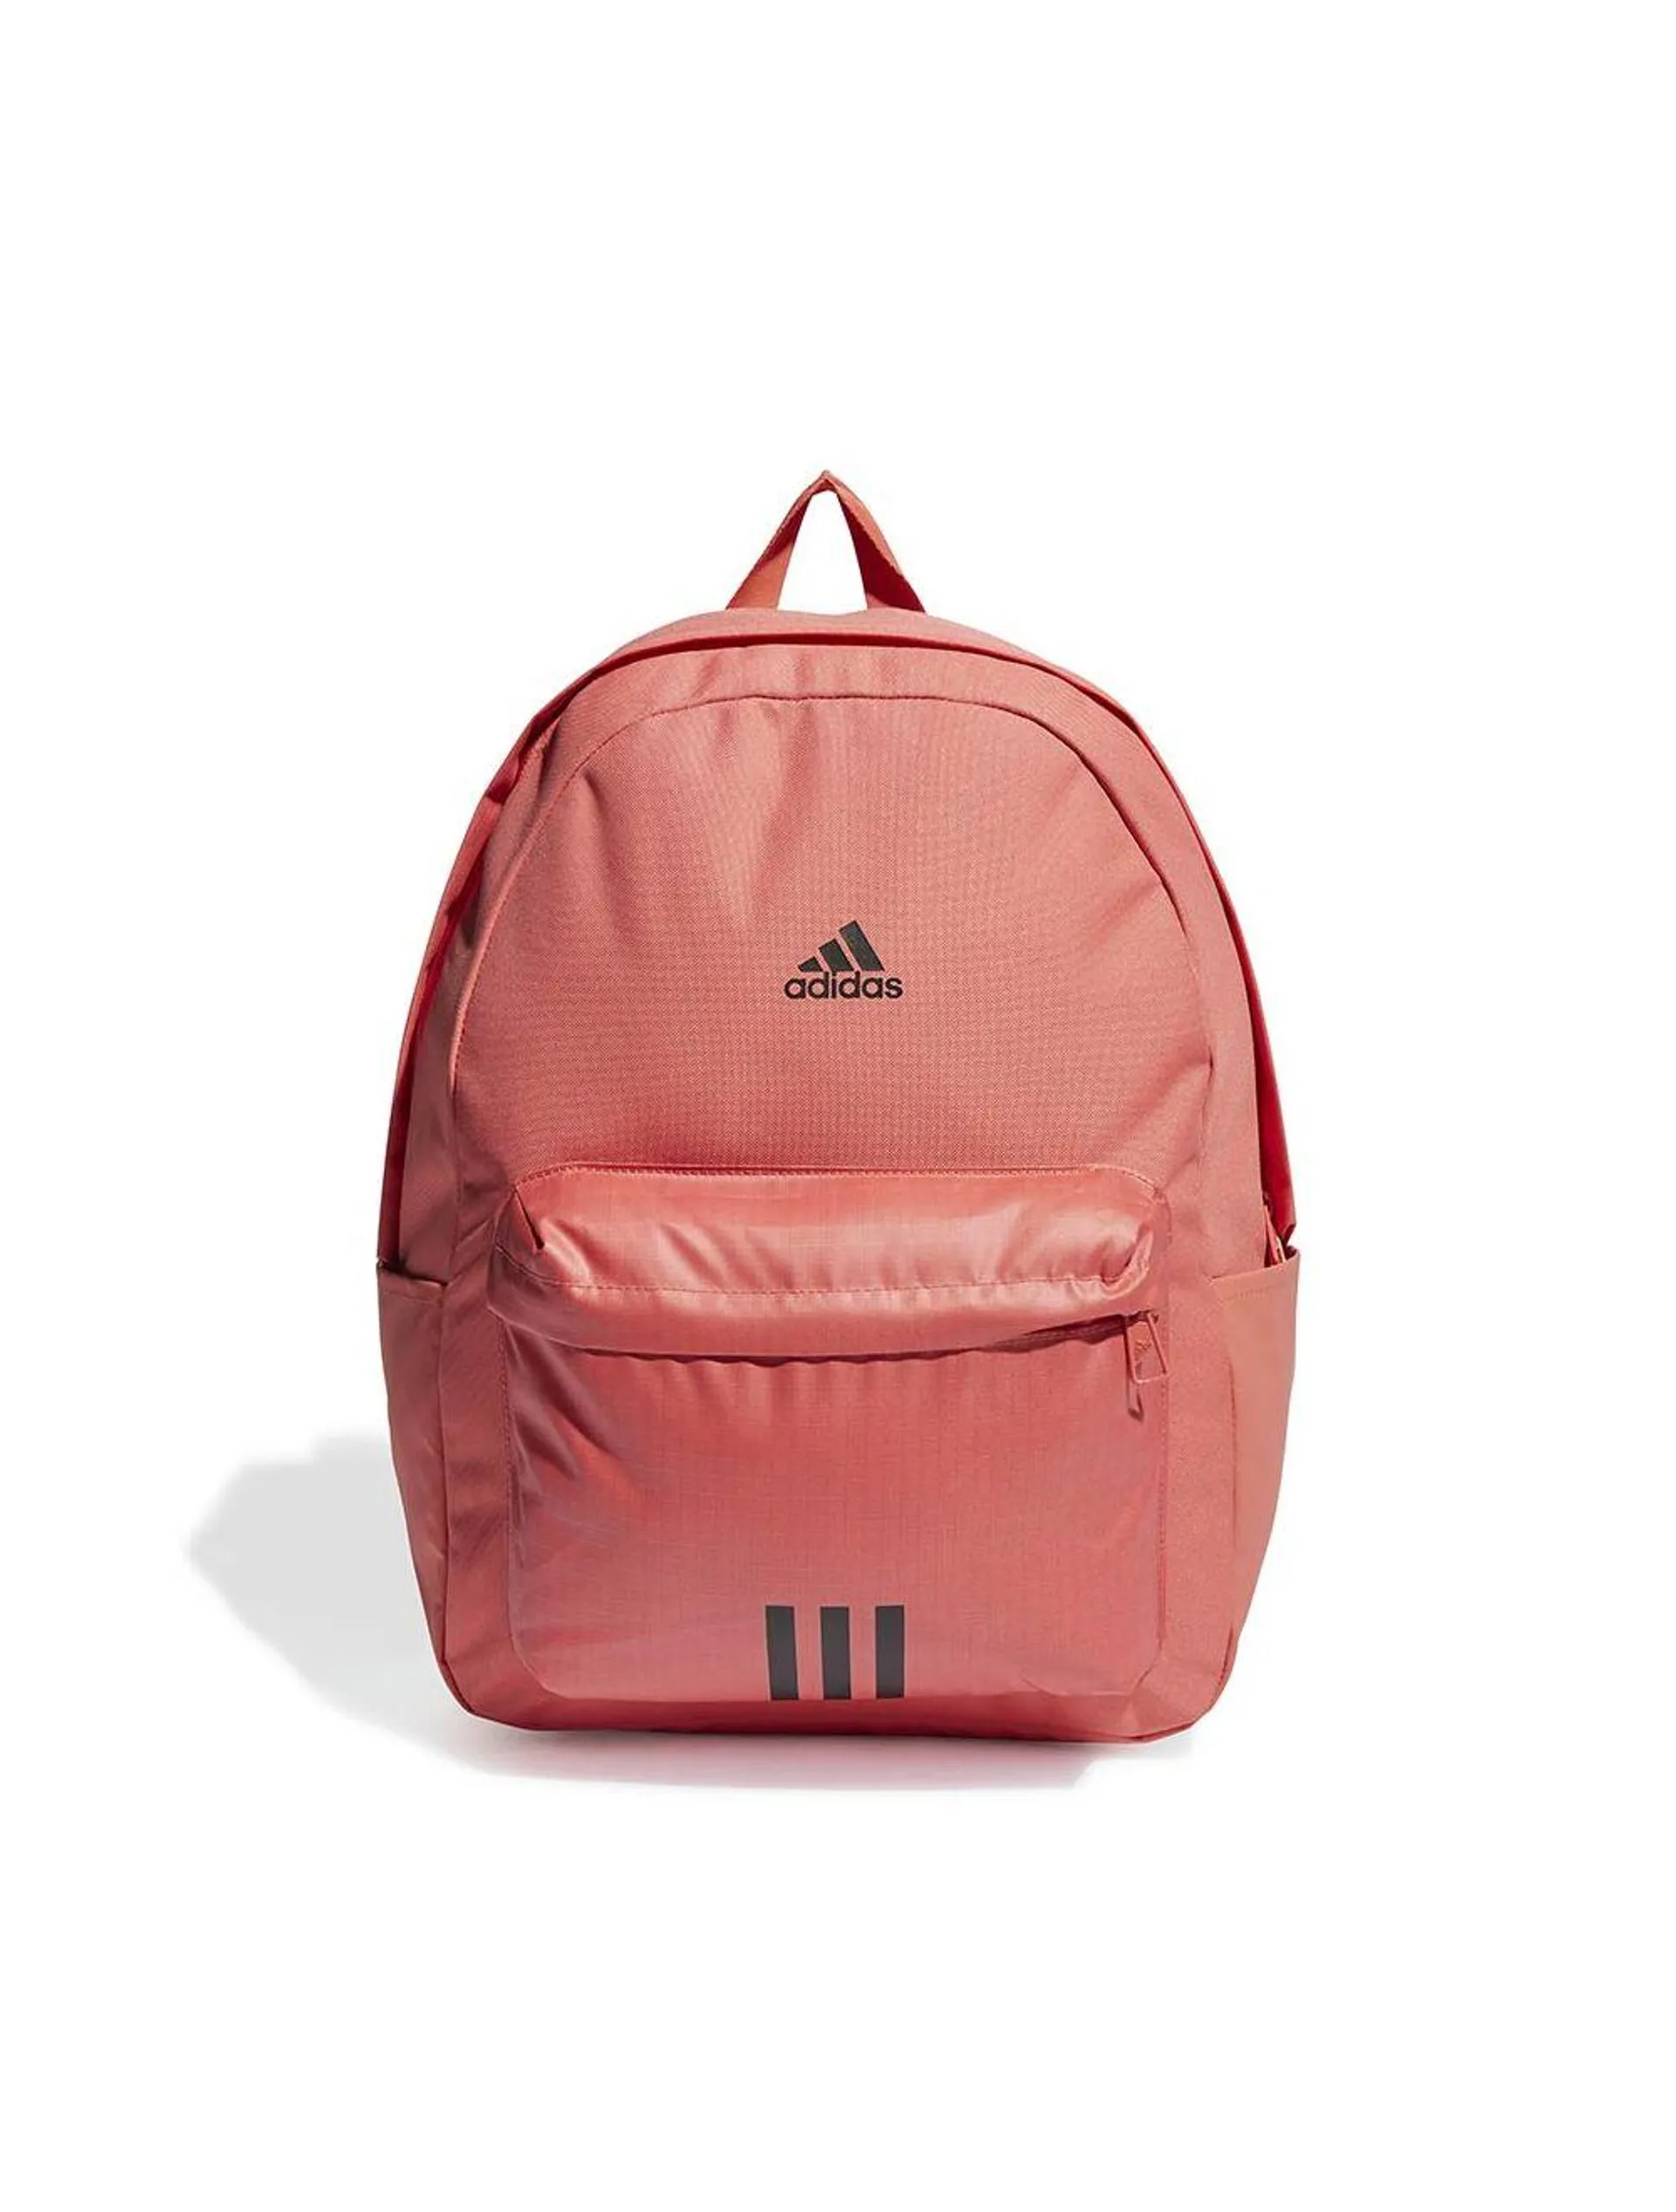 adidas Performance Classic Badge of Sport 3-Stripes Backpack Scarlet/Black